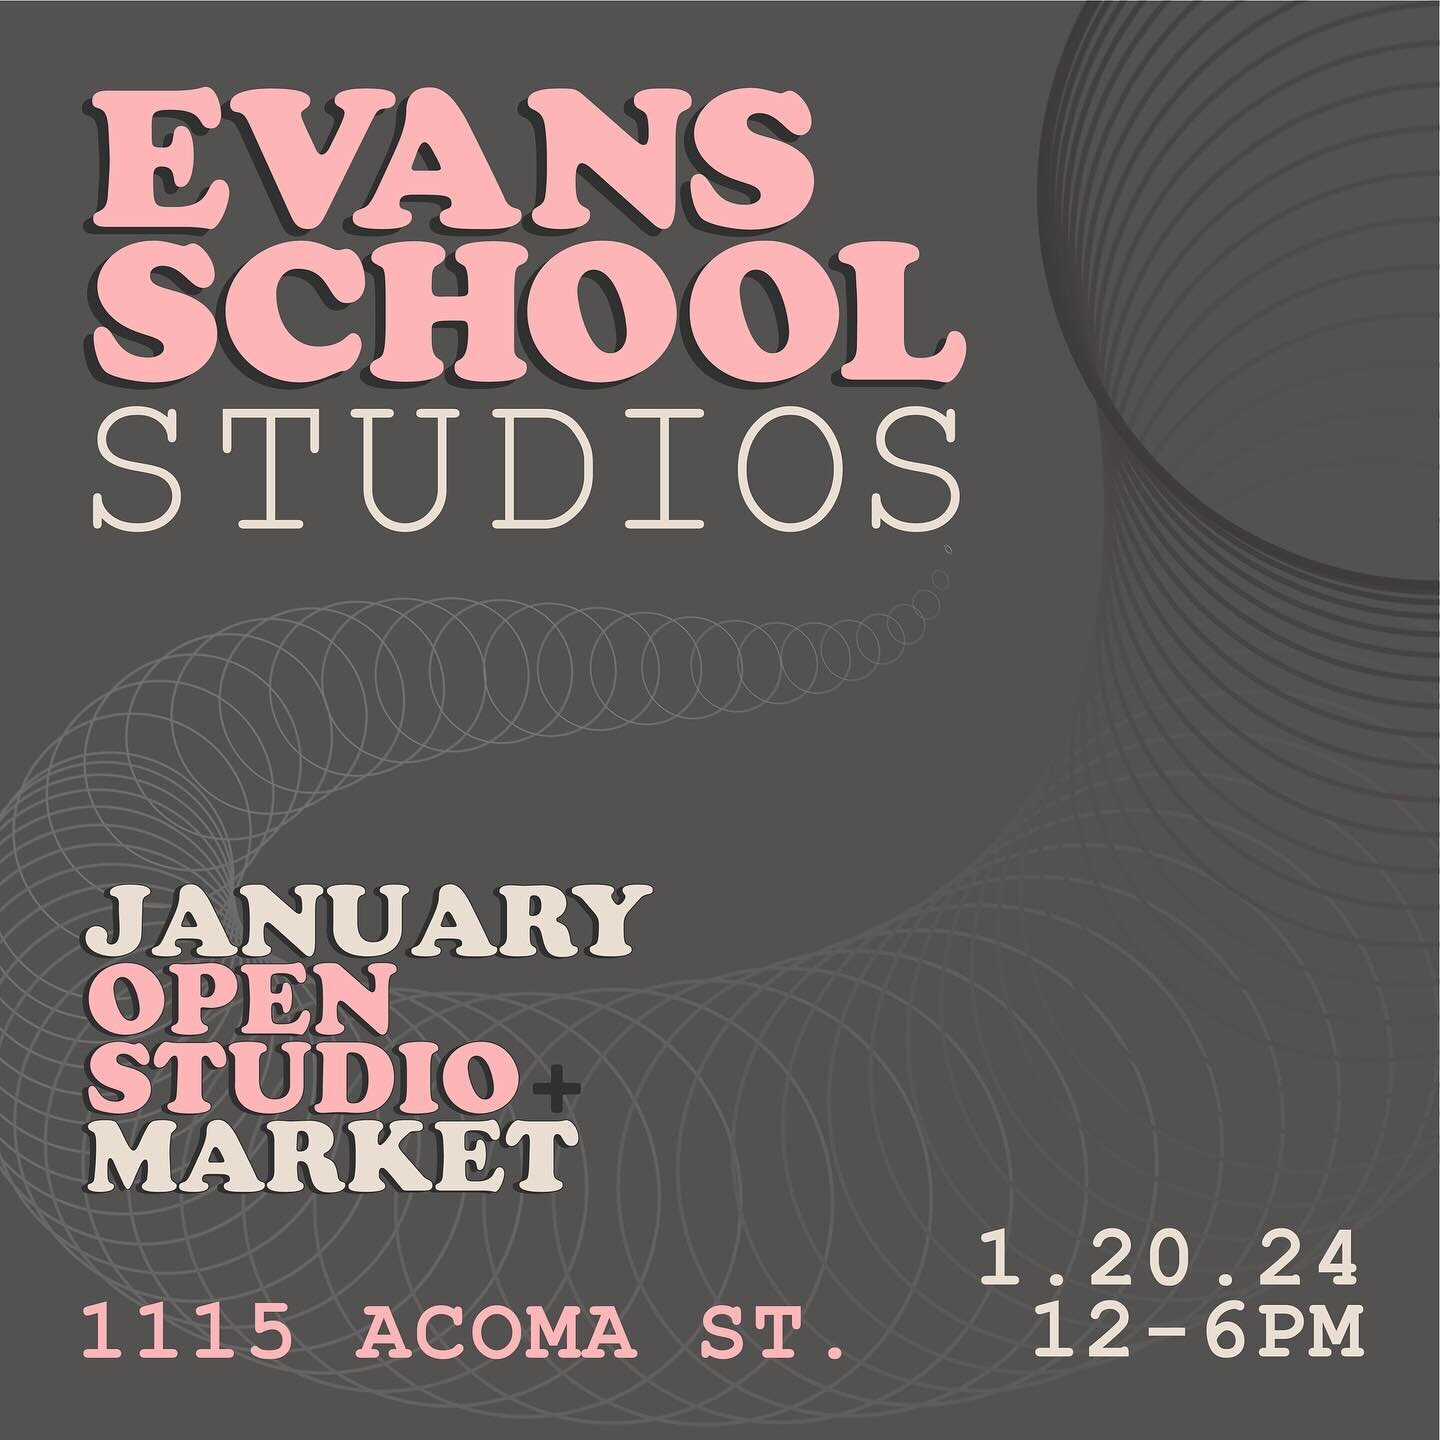 Join us for a new, monthly celebration of local contemporary arts at the Evan School Open Studios + Art Market! Immerse yourself in creativity on Saturday, January 20th from 12 - 6PM, and mark your calendars because this event will happen every third